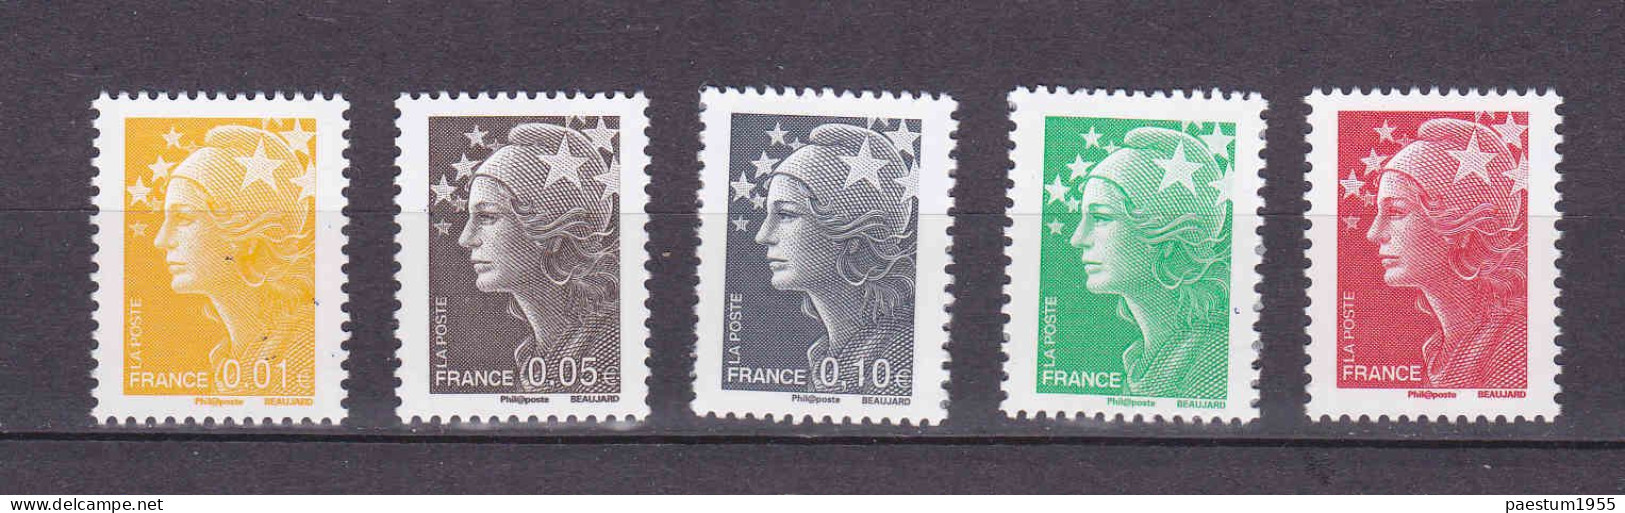 Série COMPLETE 13 Timbres Gommés Neuf** 2008 MNH Marianne De BEAUJARD Y&T 4226 à 4238 - 2008-2013 Marianne Of Beaujard